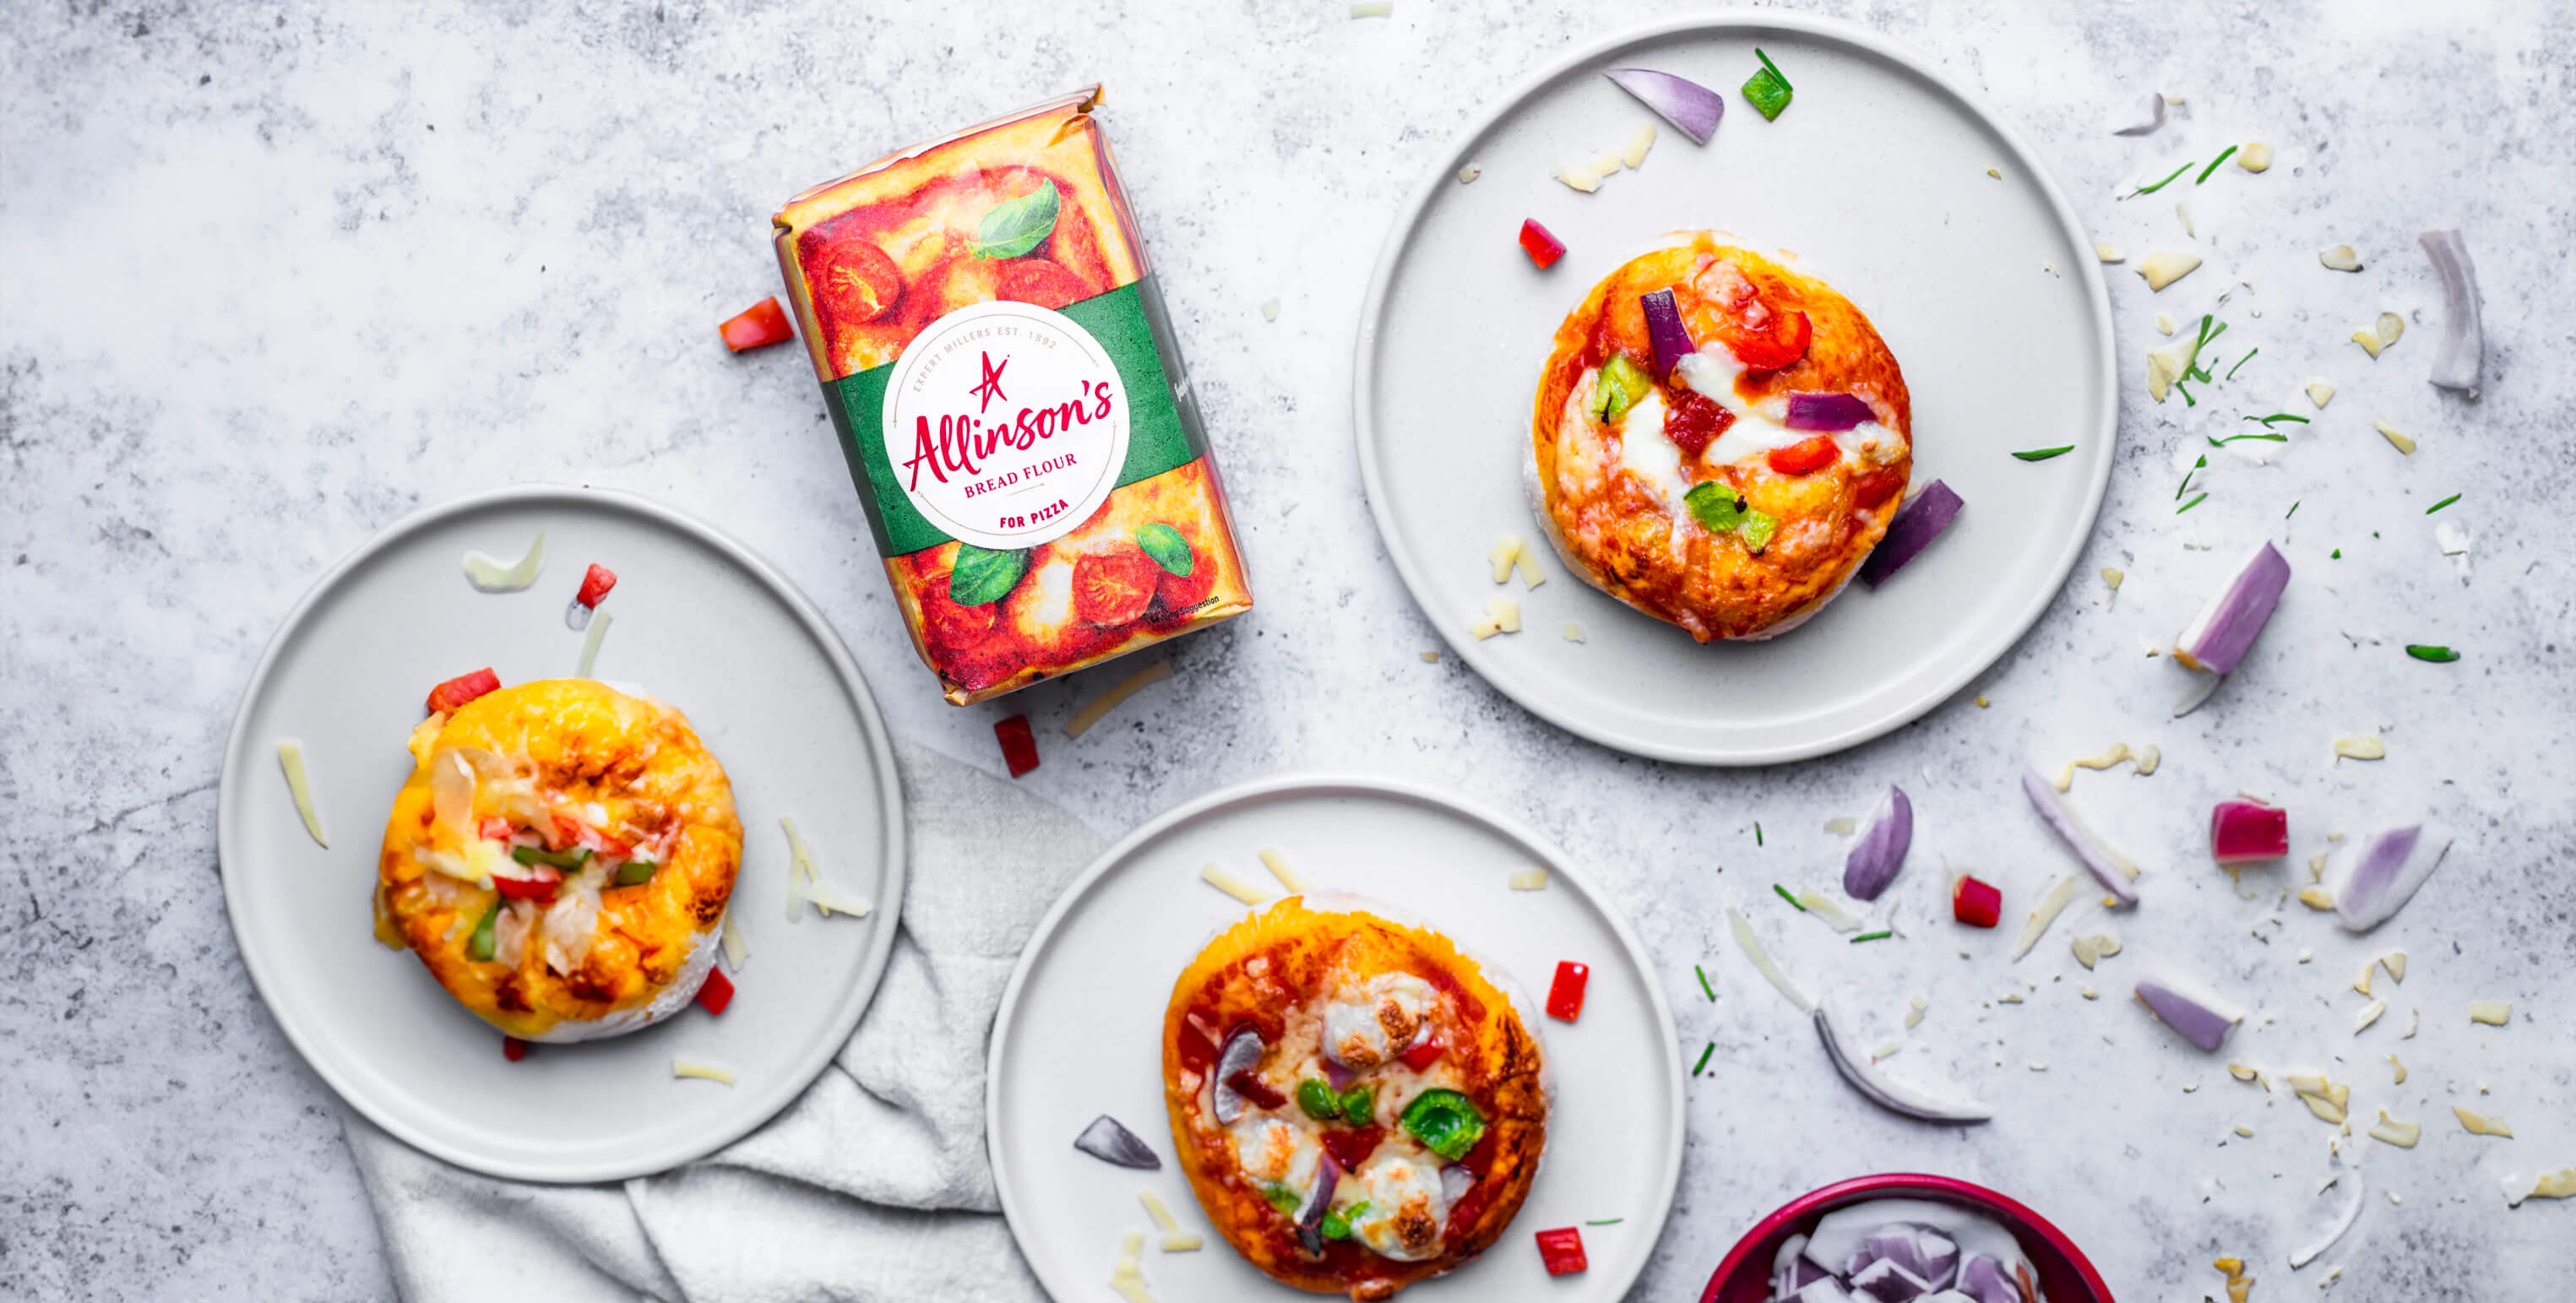 A pack of Allinson's Bread Flour for Pizza, surrounded by mini pizzas topped with mozzarella and colourful slices of pepper and red onion.